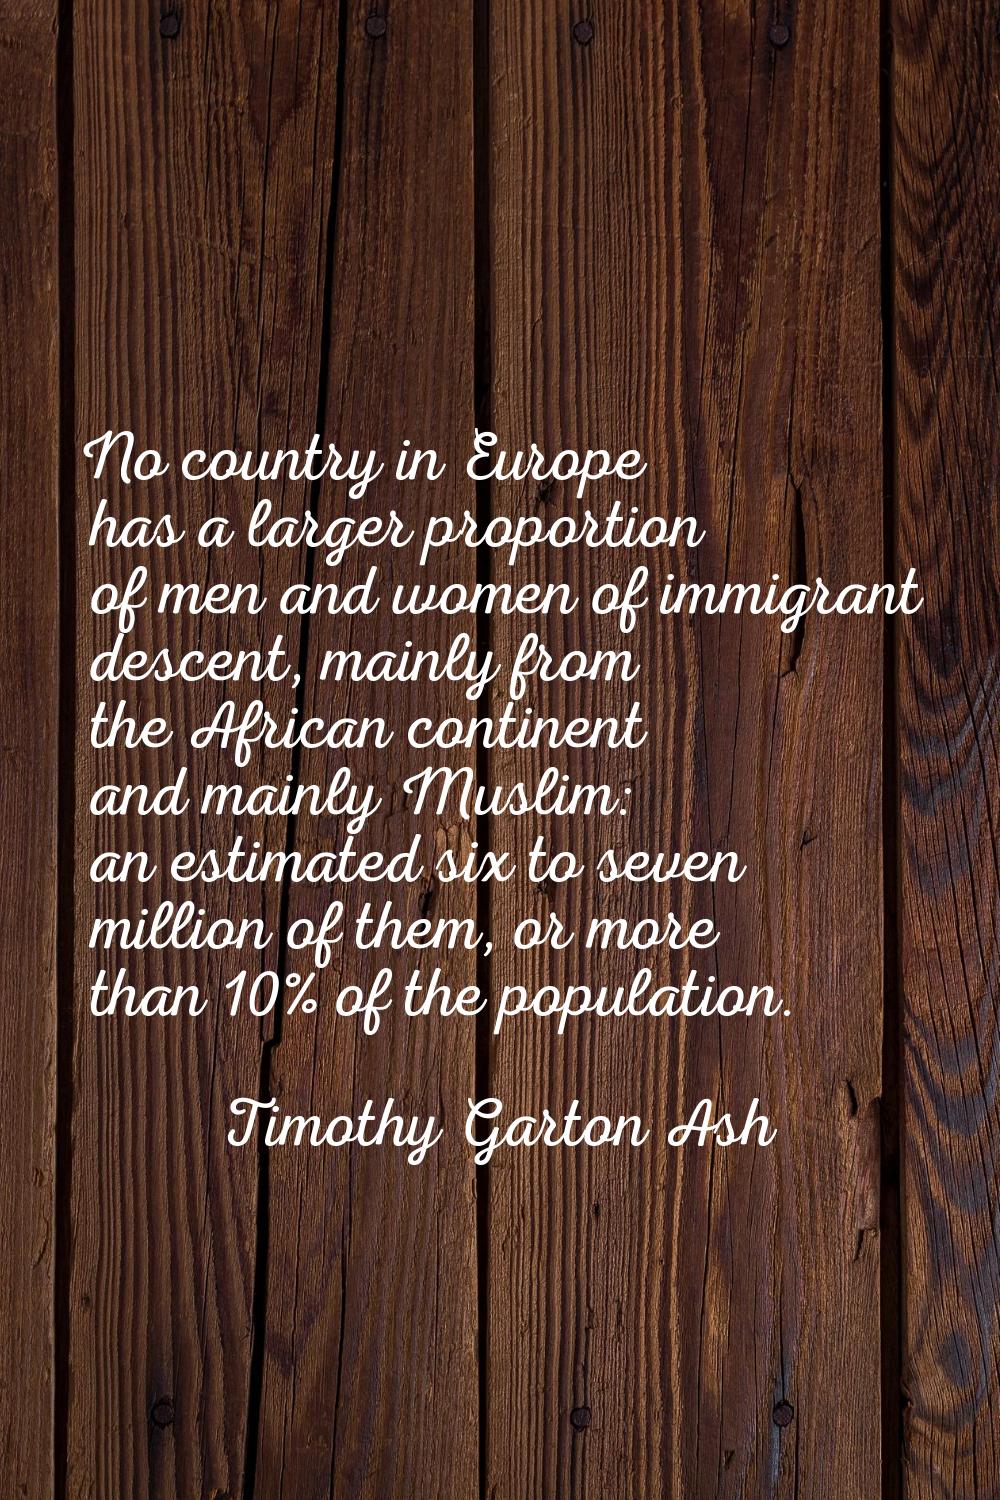 No country in Europe has a larger proportion of men and women of immigrant descent, mainly from the